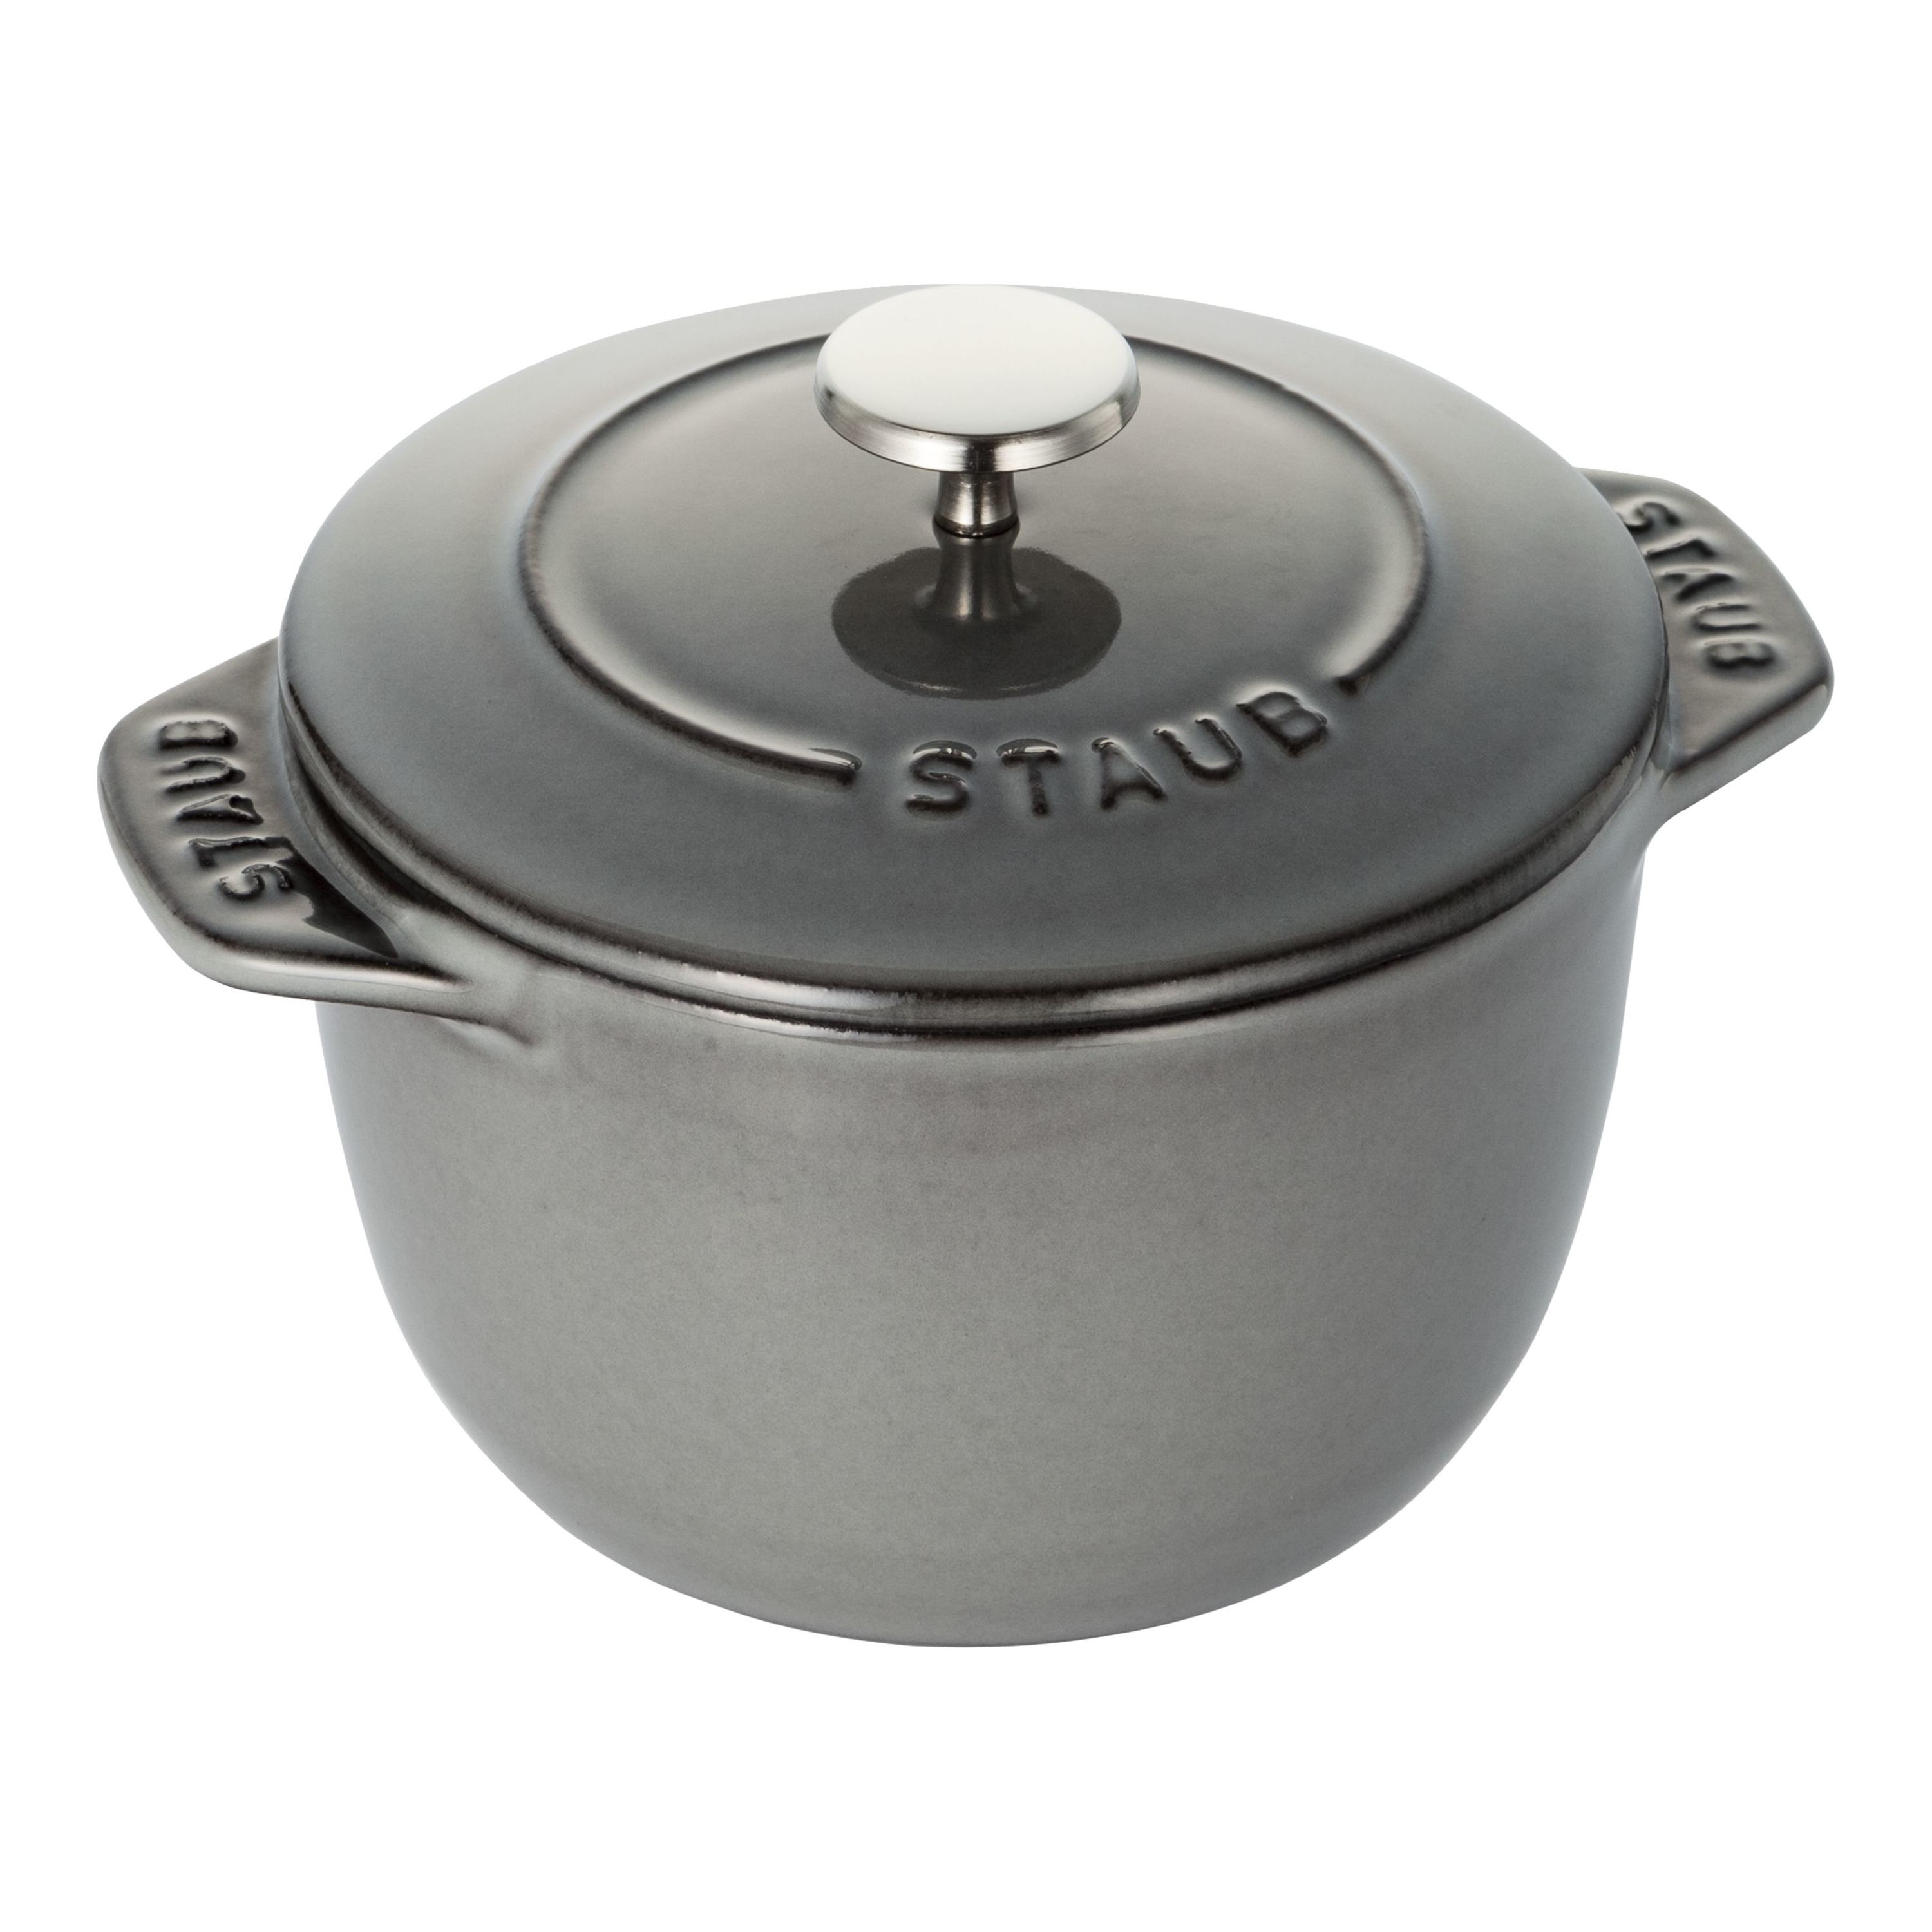 Staub Cast Iron - Specialty Items 0.775 qt, Petite French Oven, graphite  grey